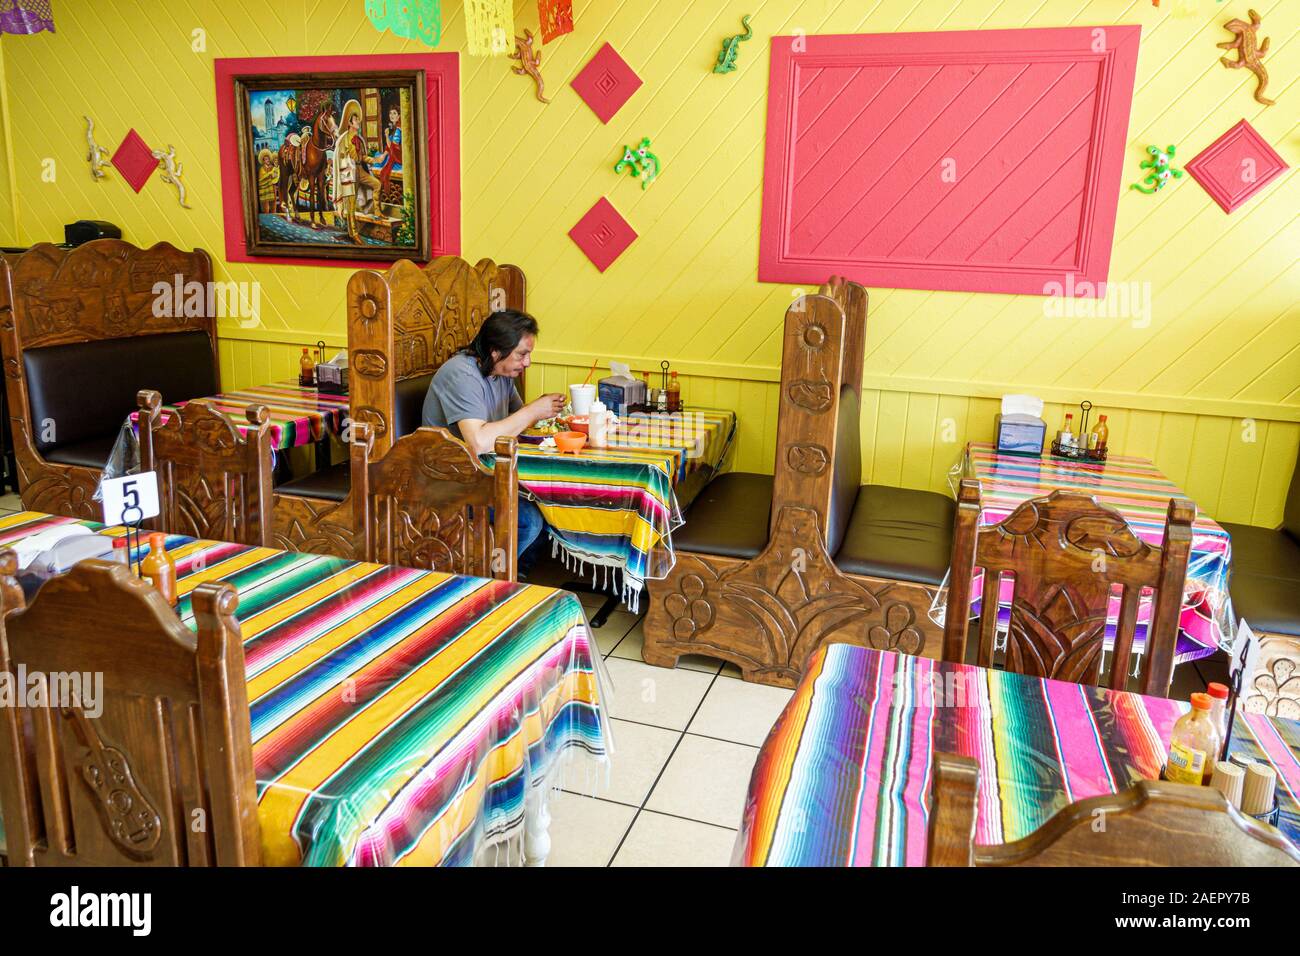 Indiantown Florida,Indiantown Florida,La Mexicana Restaurante, restaurant,interior inside,traditional decor,booth,Mexican ethnic food,colorful textile Stock Photo